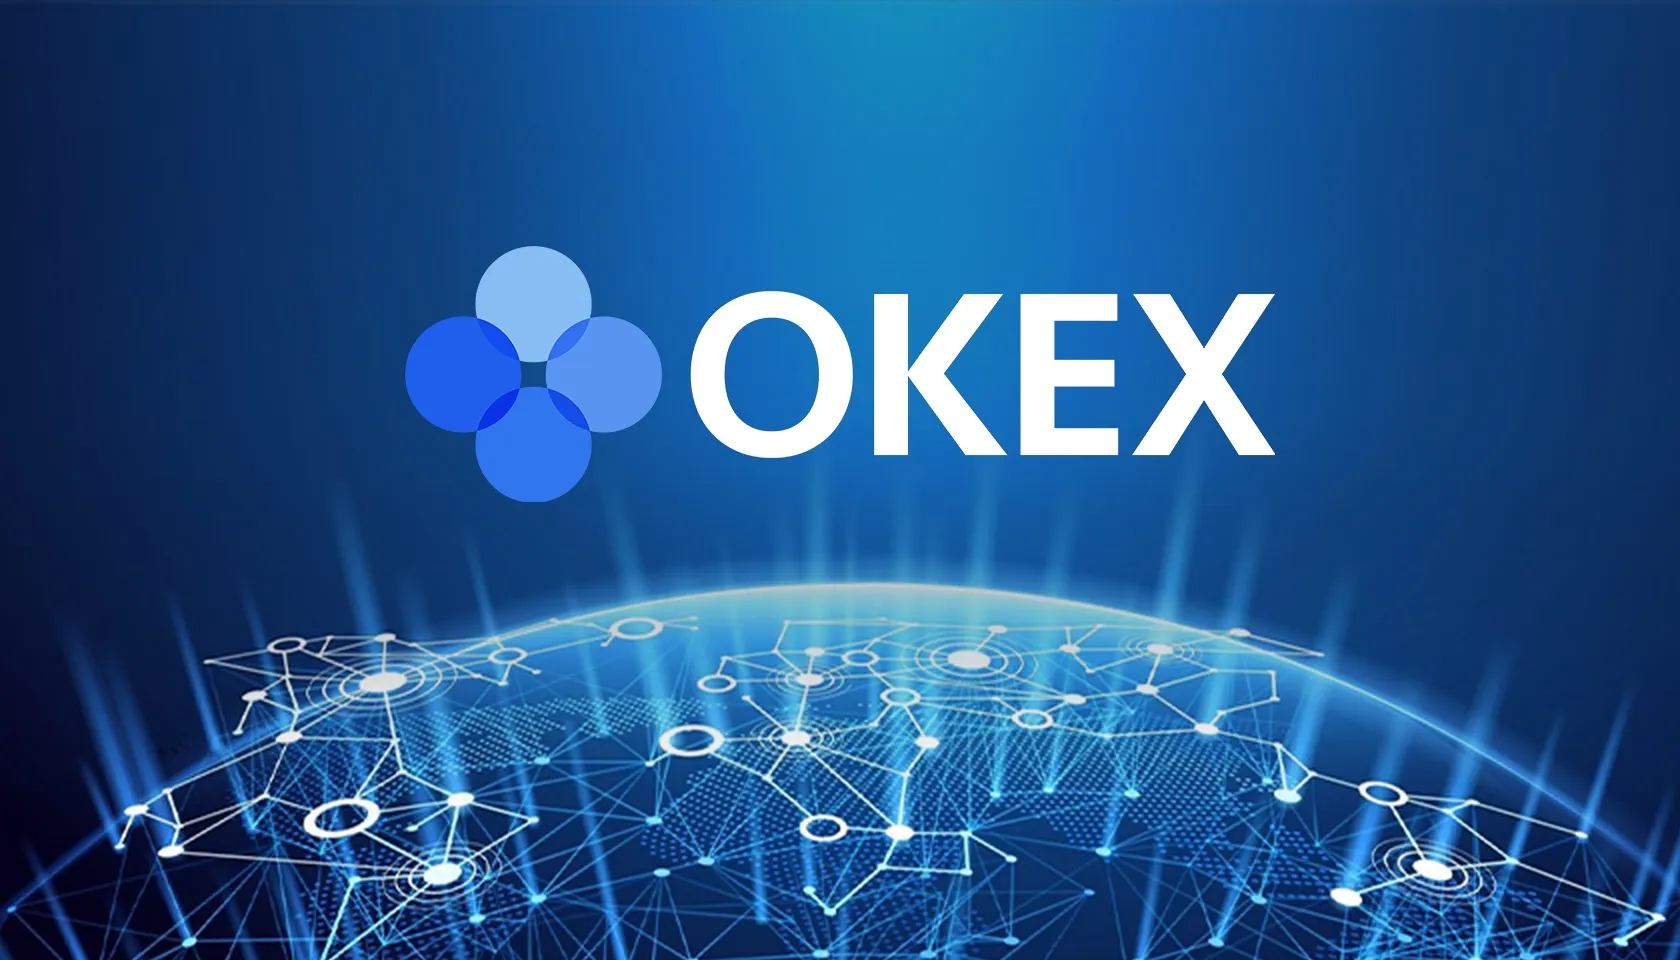 What does Ouyiokex contract mean?